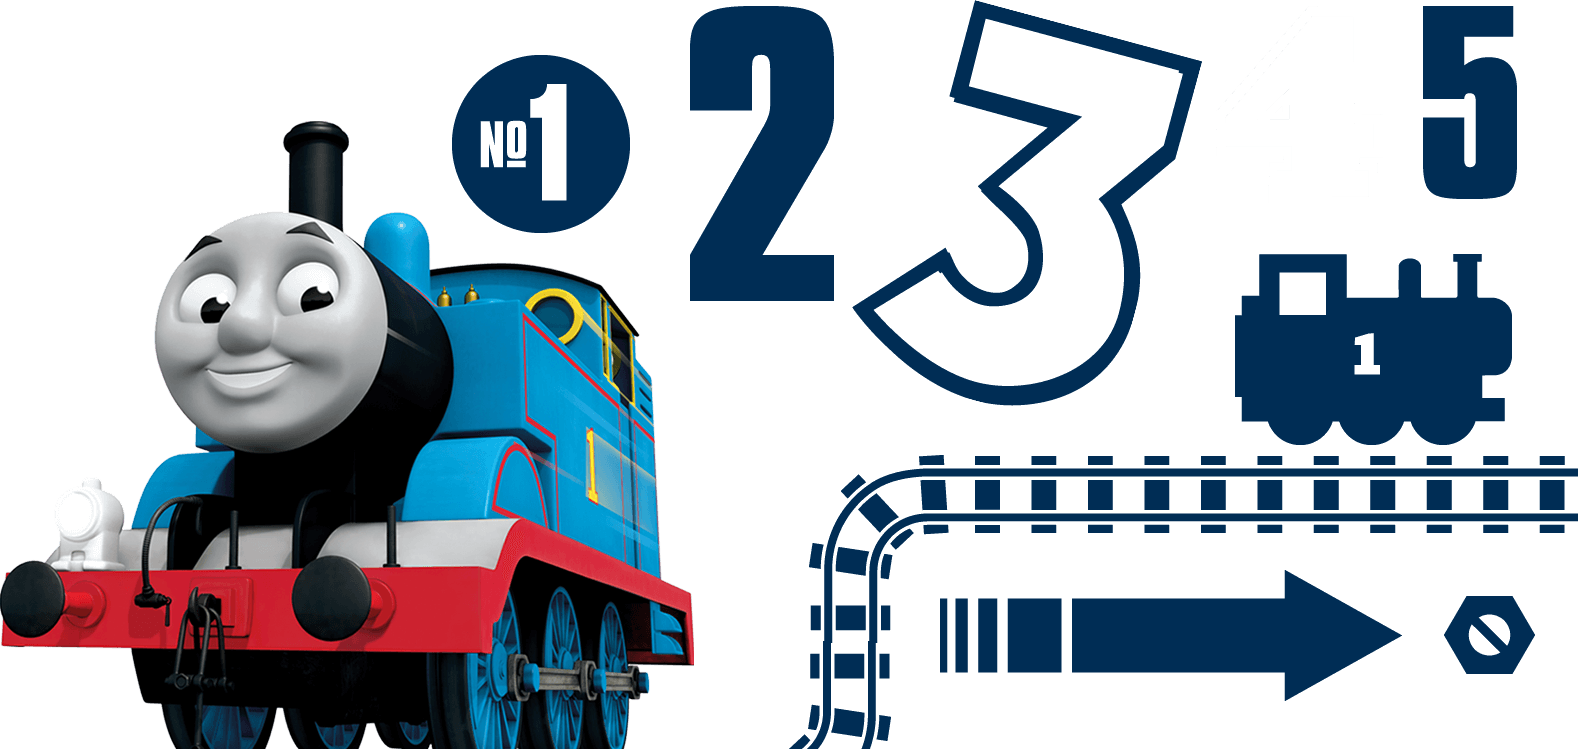 Engine clipart thomas train. Friends the toy trains